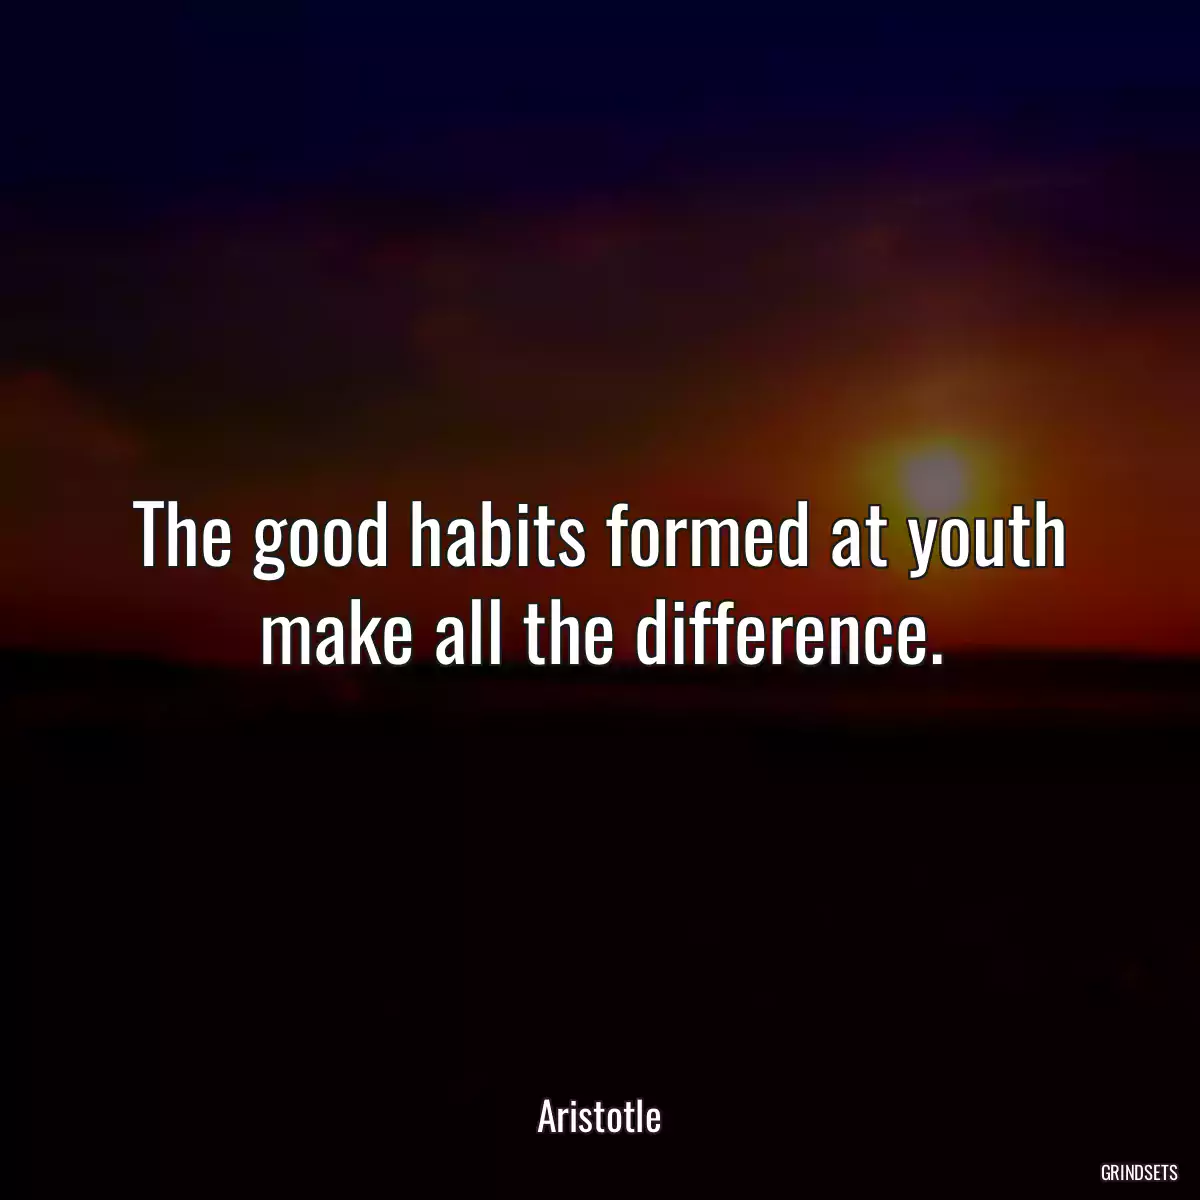 The good habits formed at youth make all the difference.